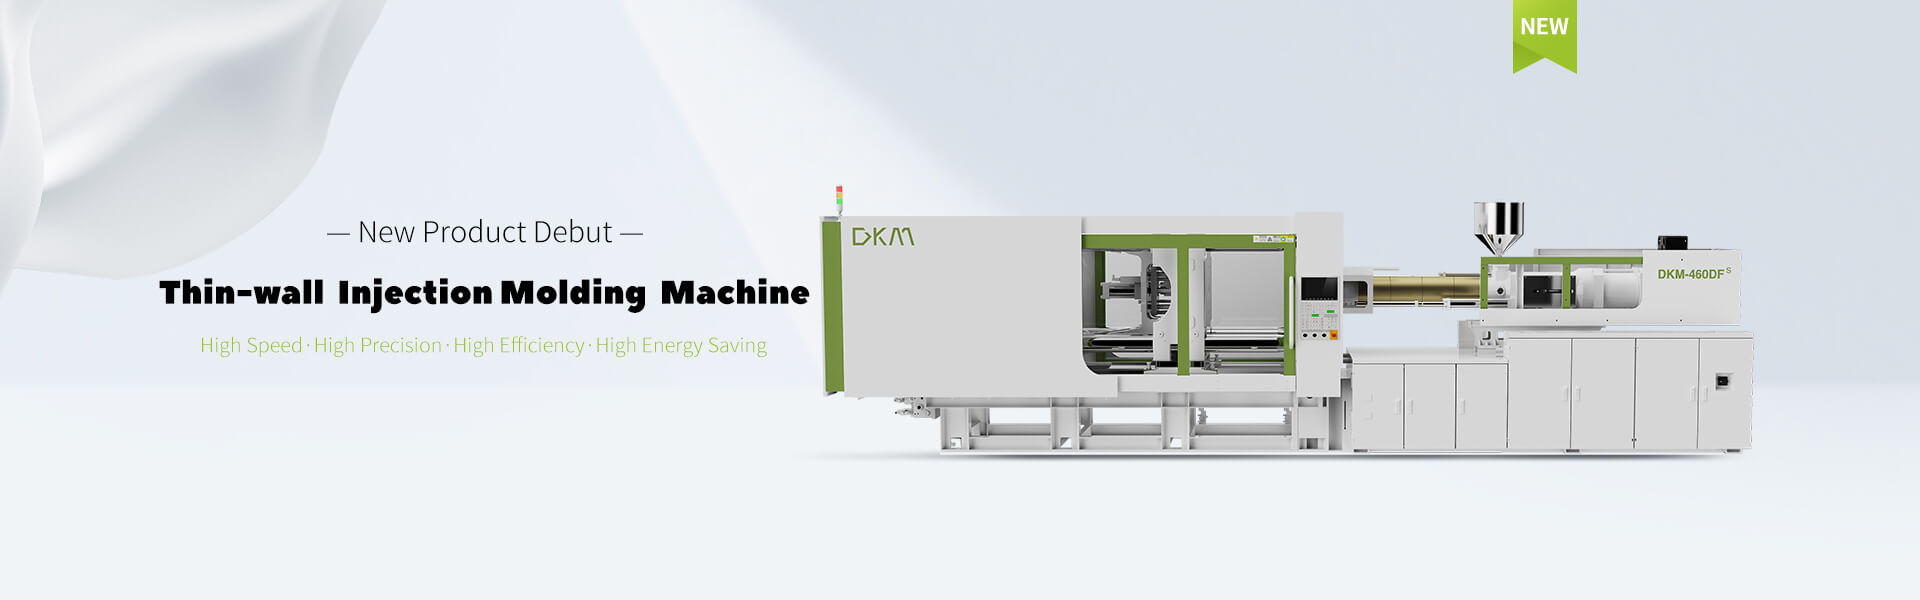 The 6th Generation Low-inertia Single-cylinder High Speed Injection Moulding Machine